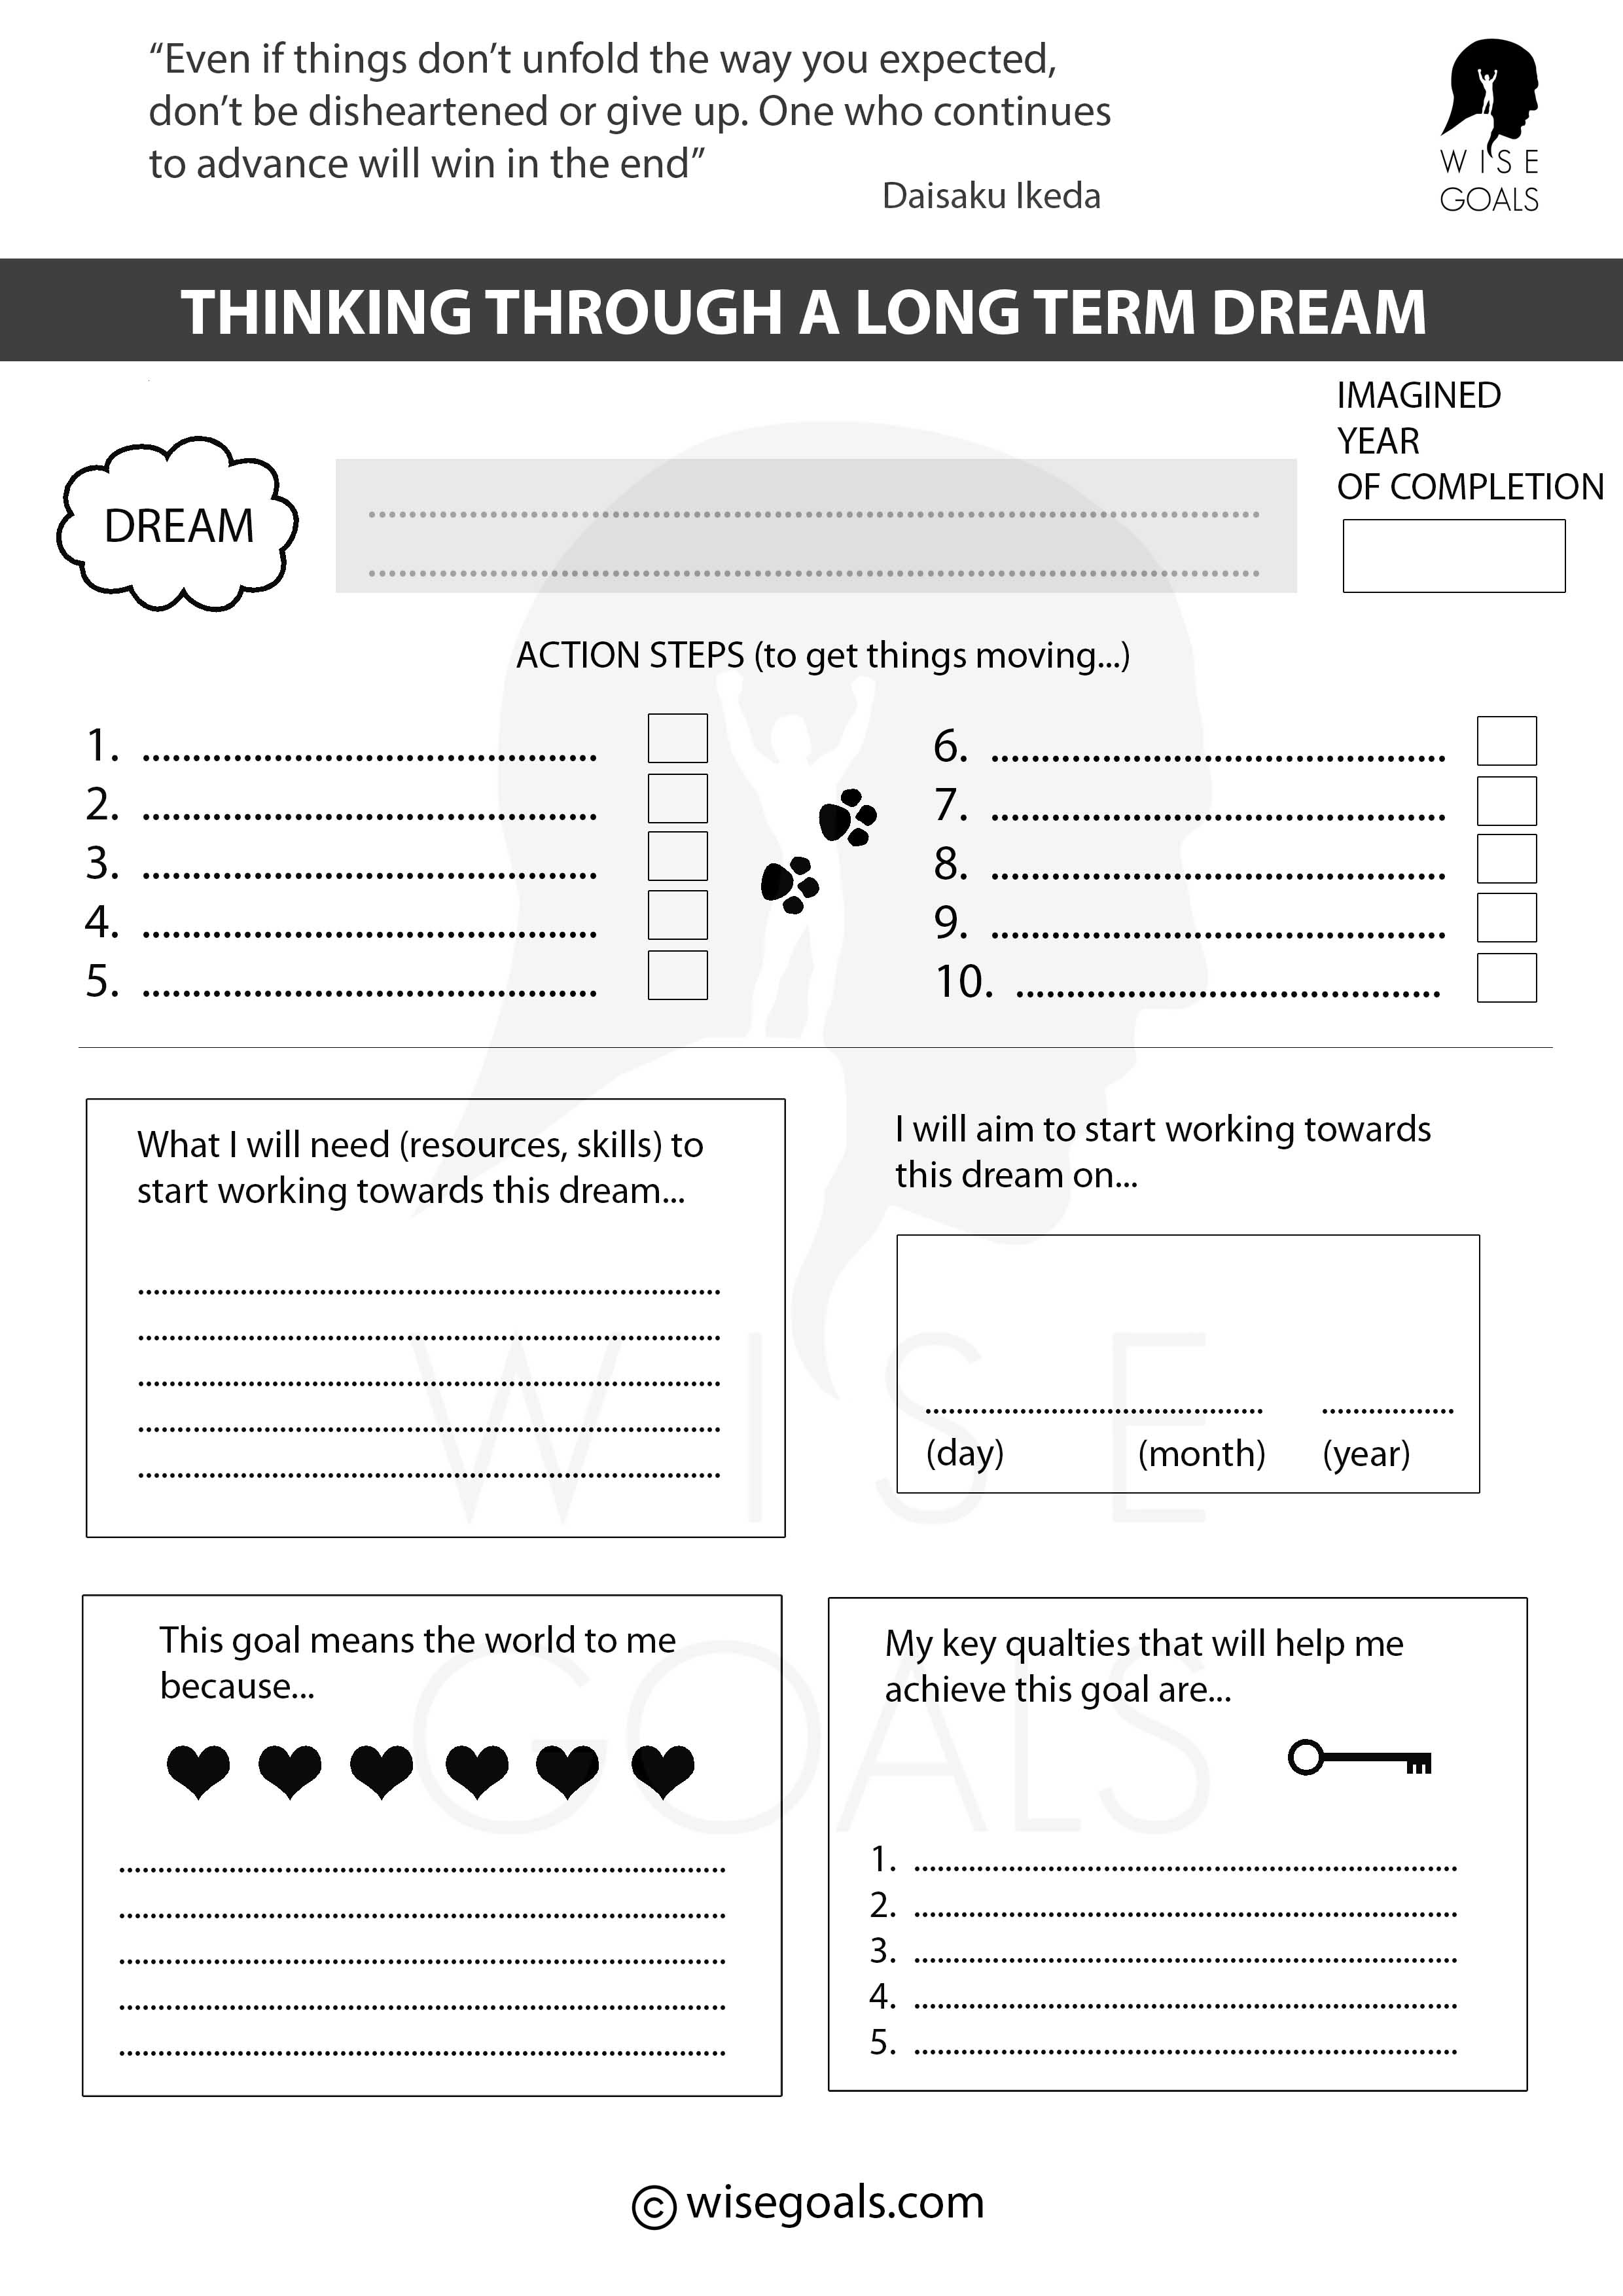 45 Goal Setting Activities, Exercises & Games (+ PDF)